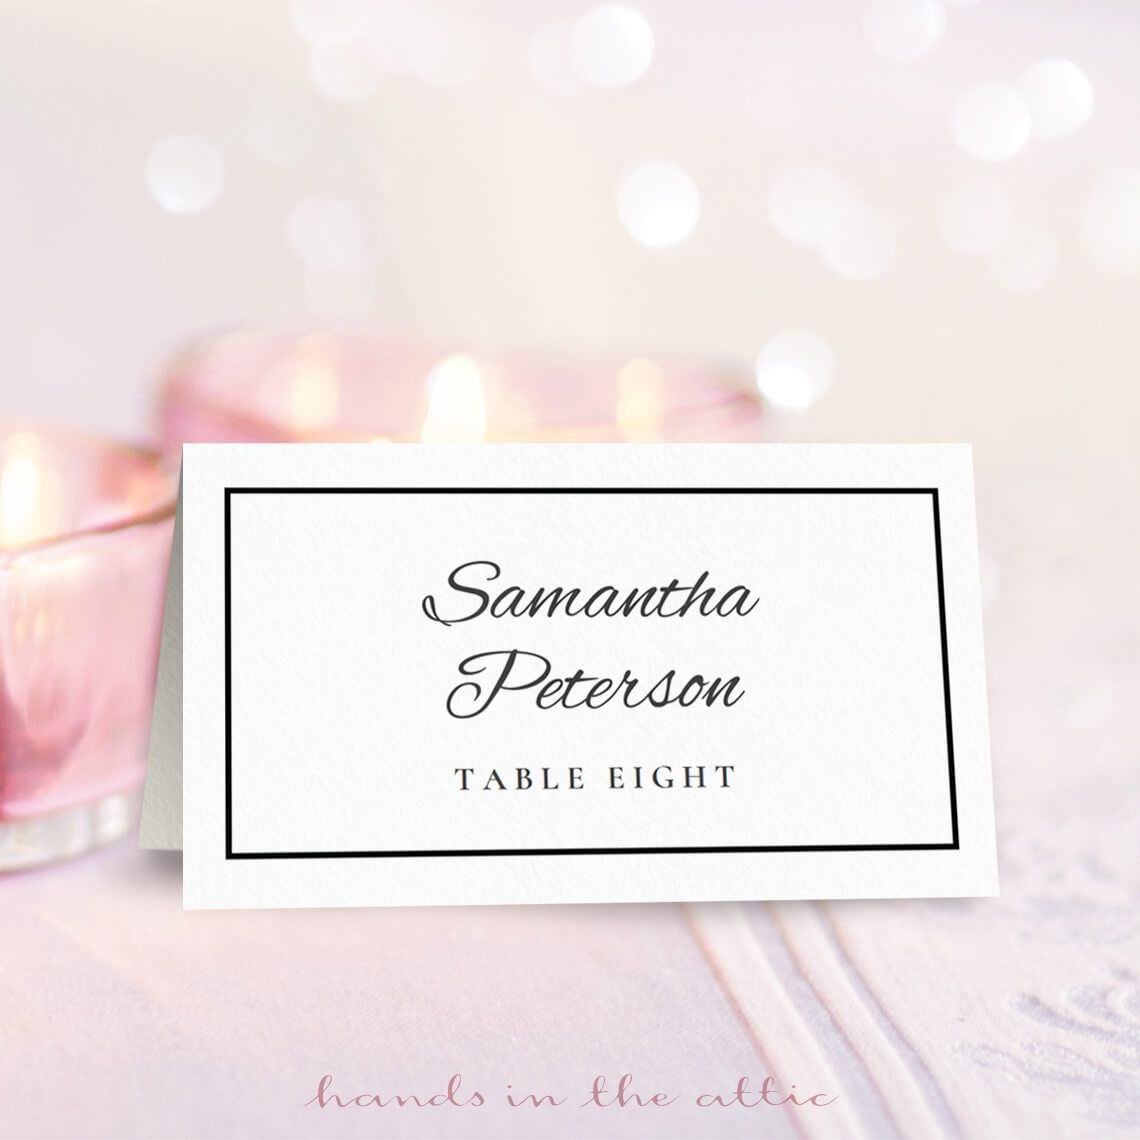 005 Free Printable Place Cards Template Shocking Ideas Table Card - Free Printable Place Cards